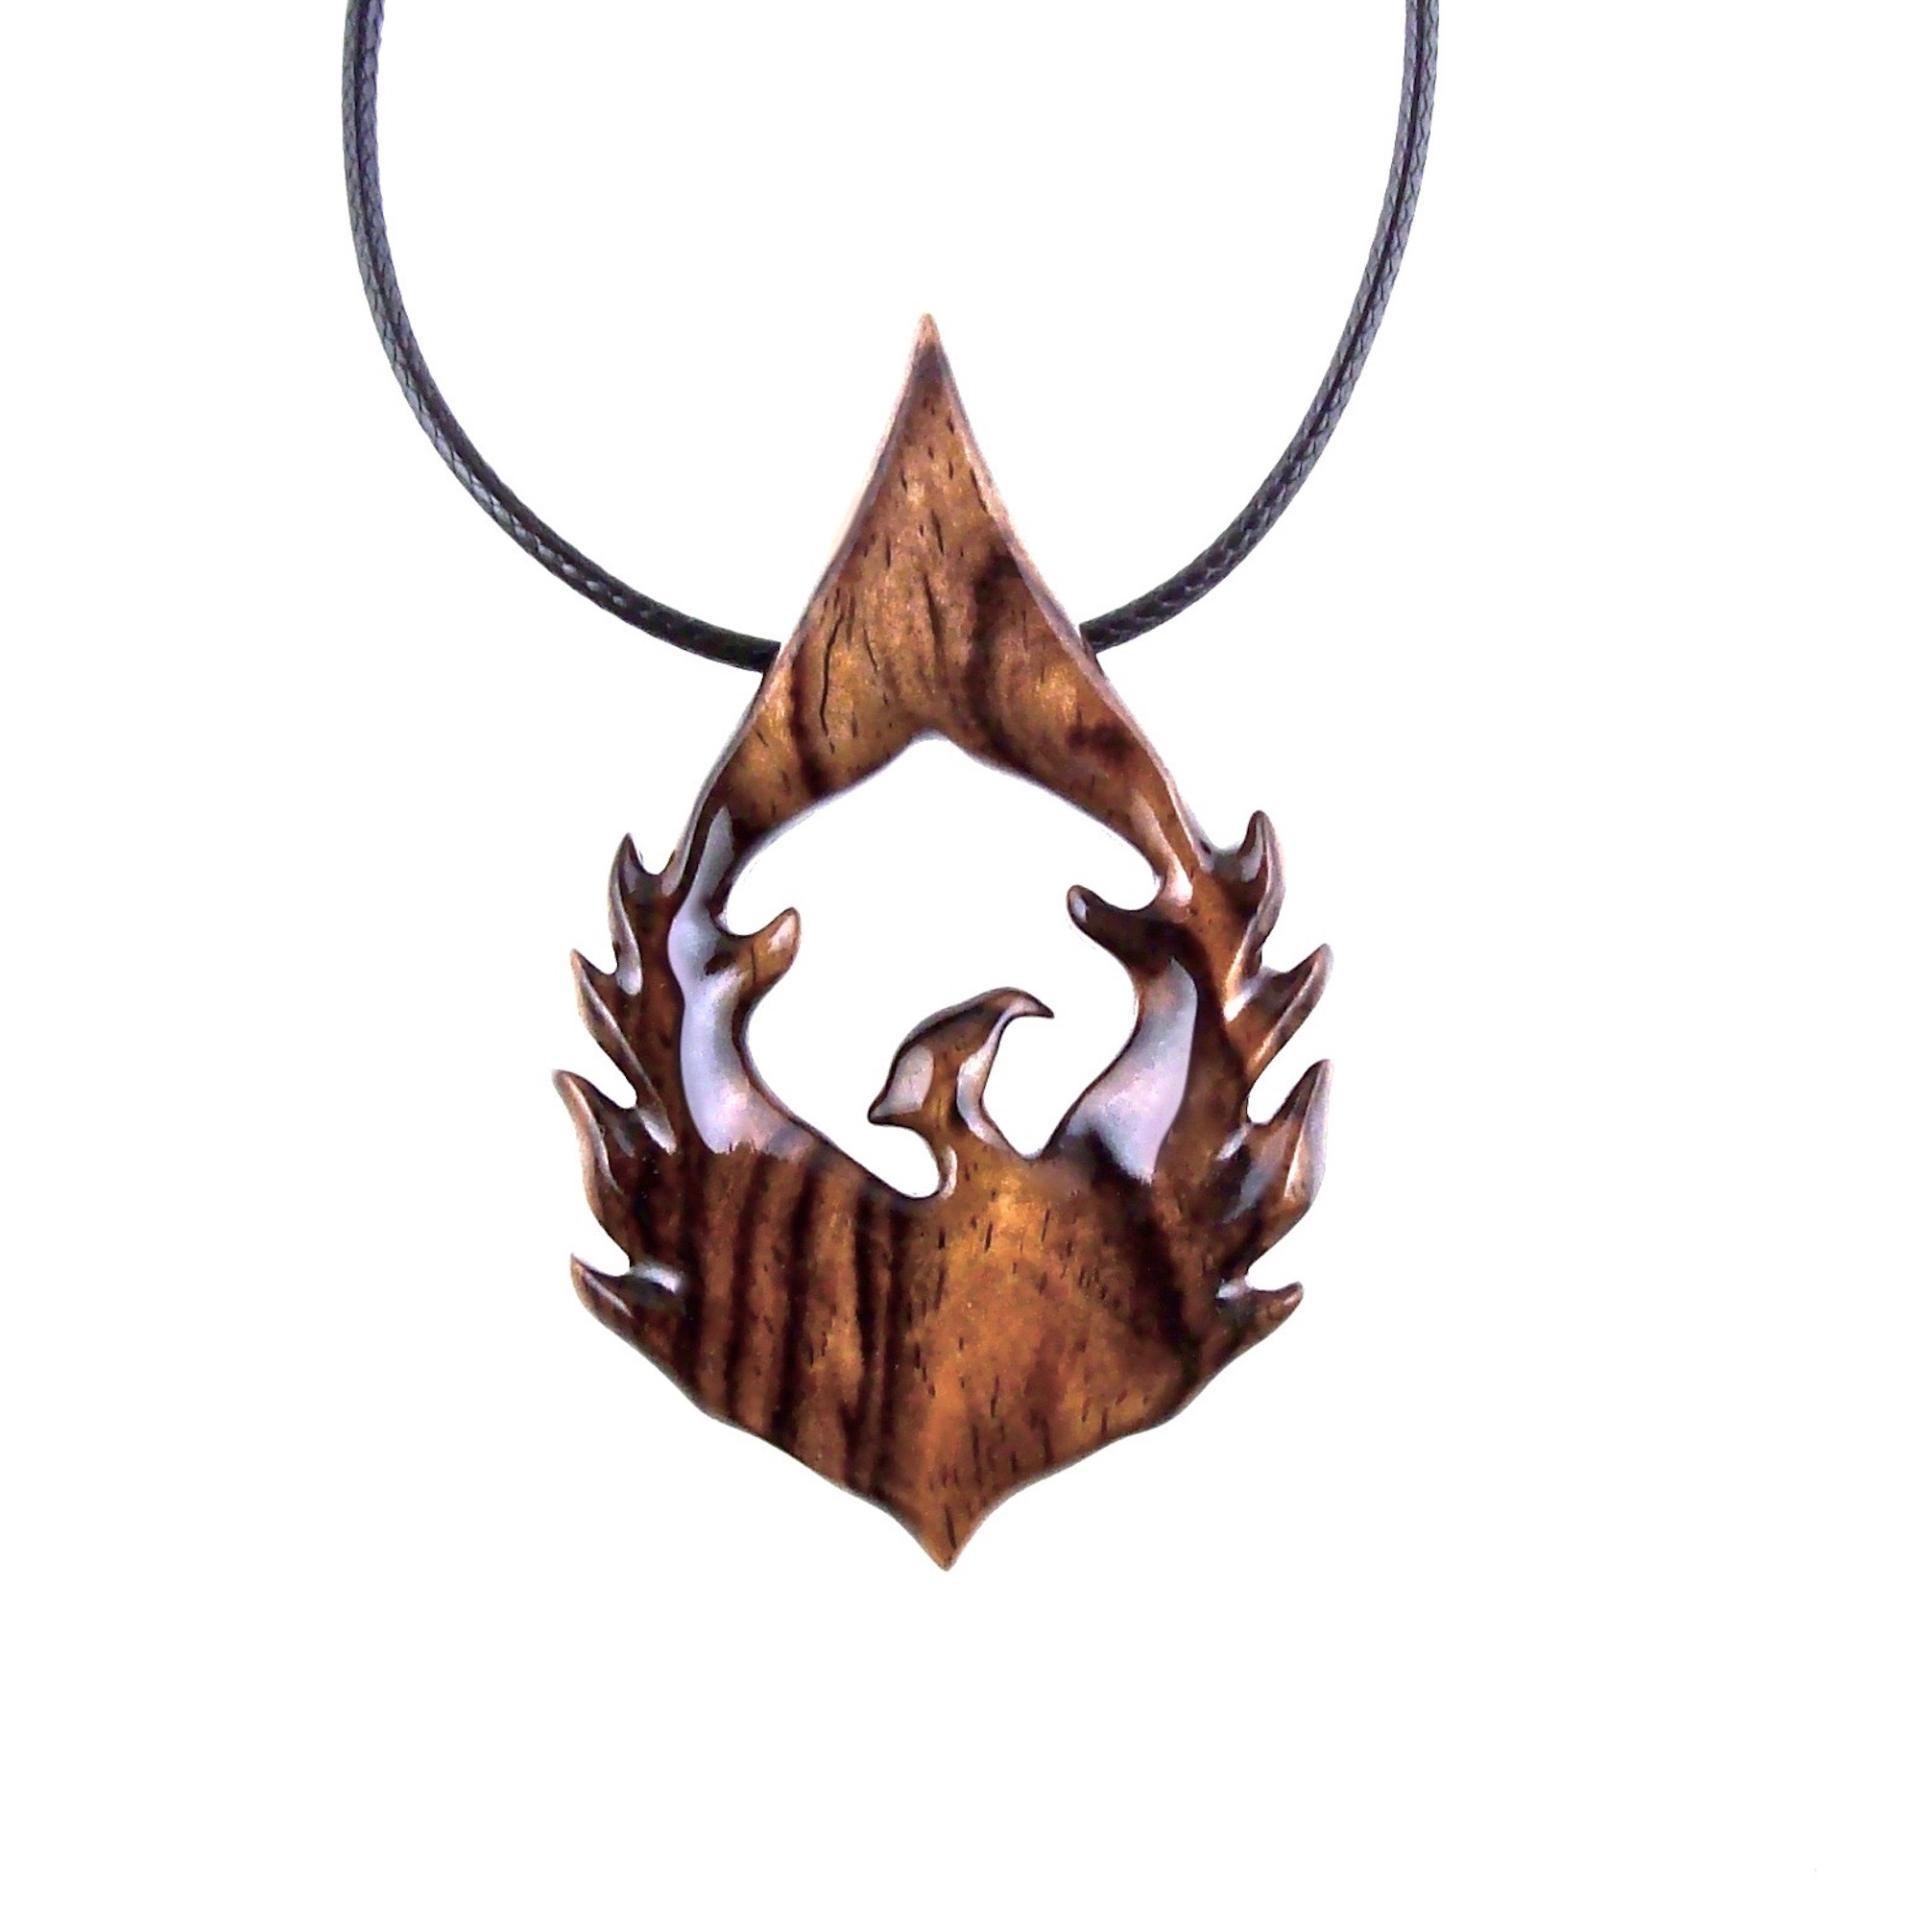 Phoenix Necklace for Men or Women, Hand Carved Wooden Phoenix Rising Pendant, Wood Firebird Necklace, Inspirational Jewelry Gift for Him Her